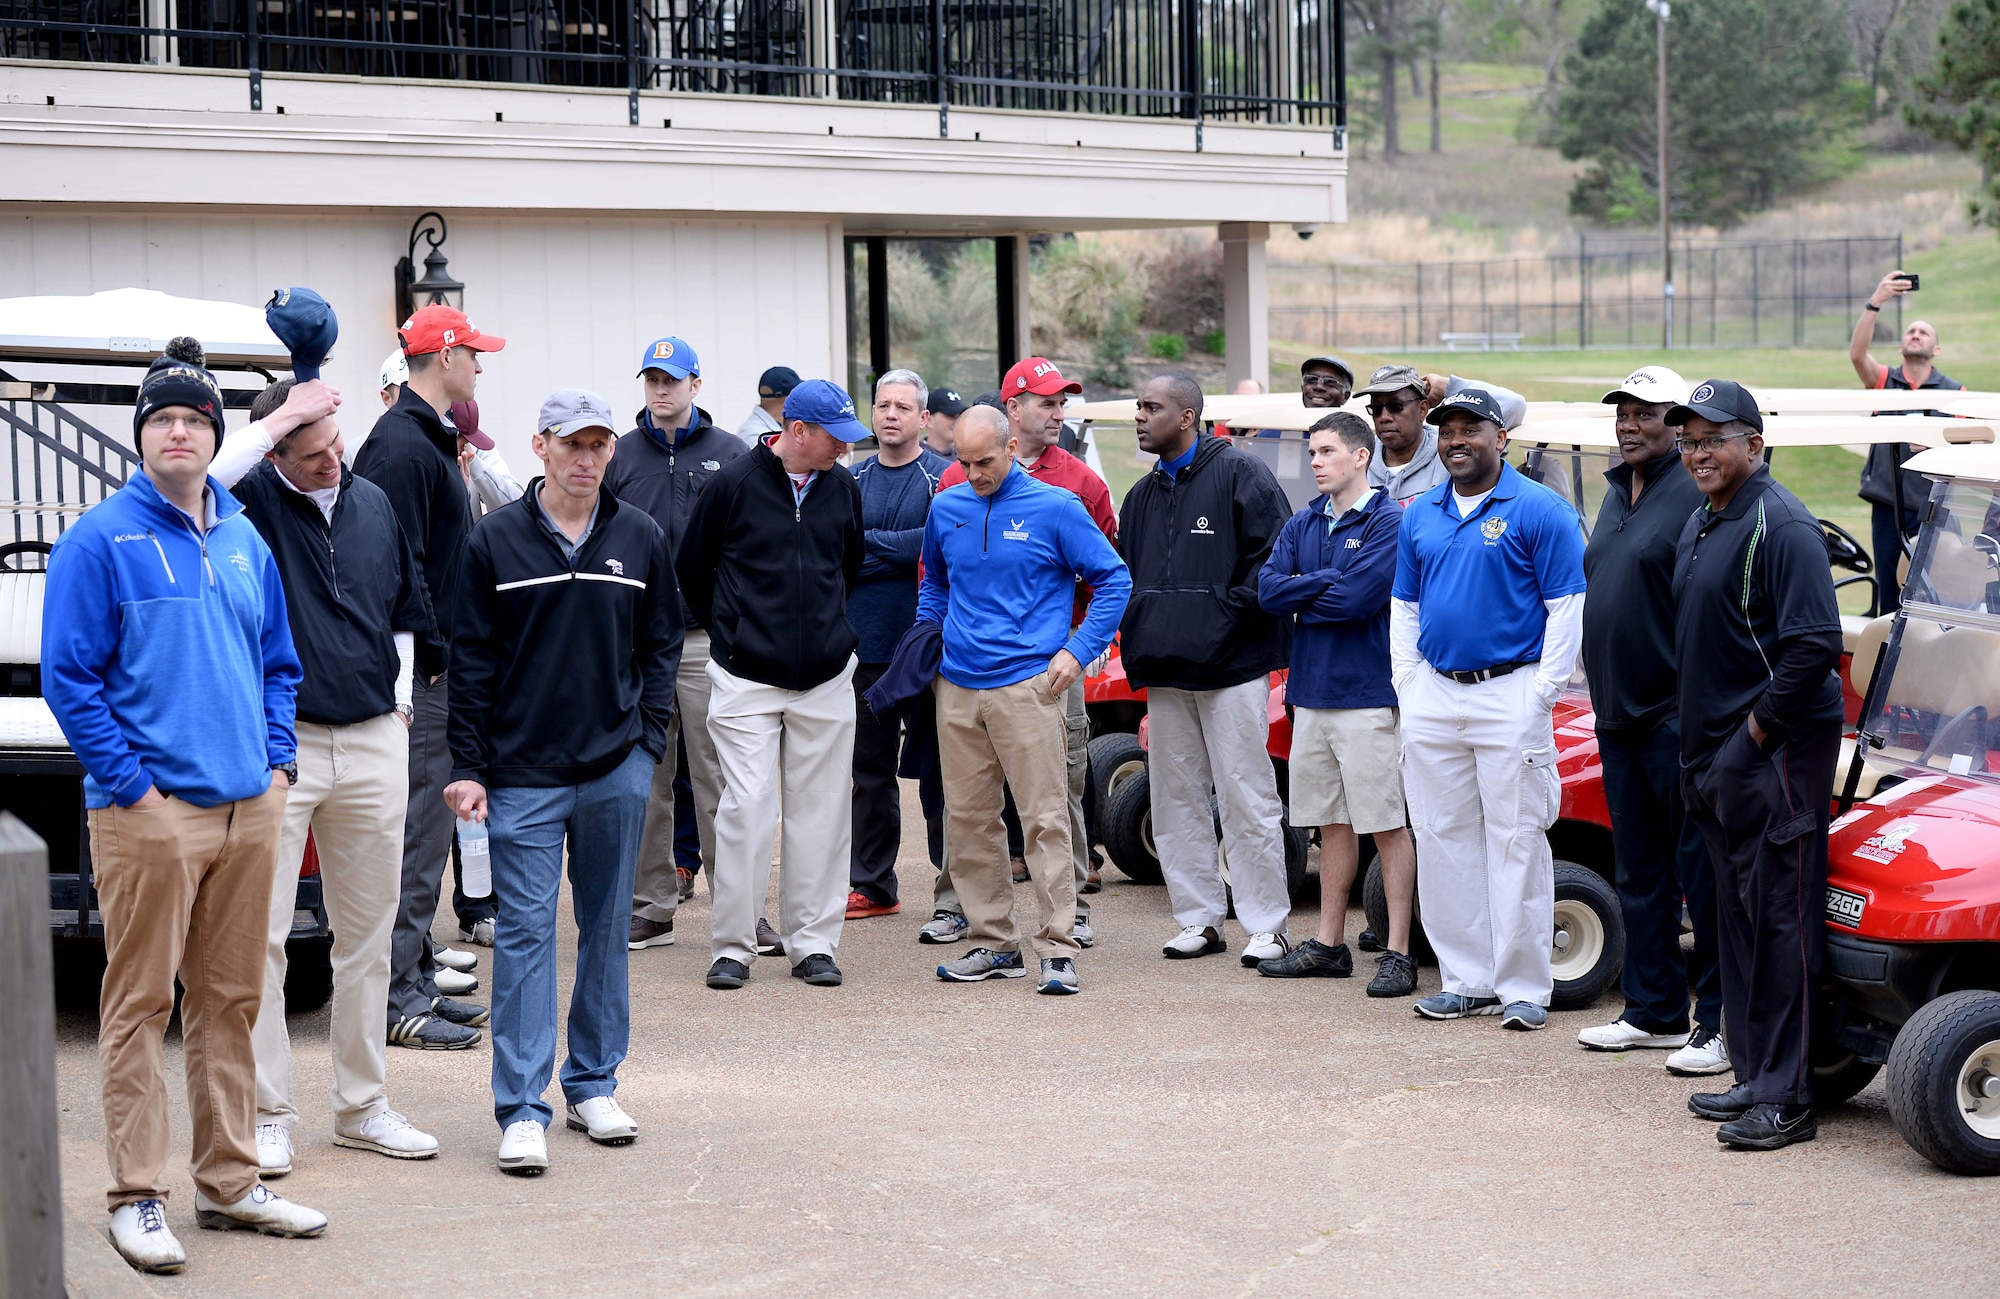 Participants wait for the starting announcements of the Happy Irby Golf Tournament March 29, 2018, at the Lion Hills Country Club in Columbus, Mississippi. George Irby continues his father's legacy in the Columbus community and is always finding new ways to expand fundraising to help children in need. (U.S. Air Force photo by Airman 1st Class Keith Holcomb)